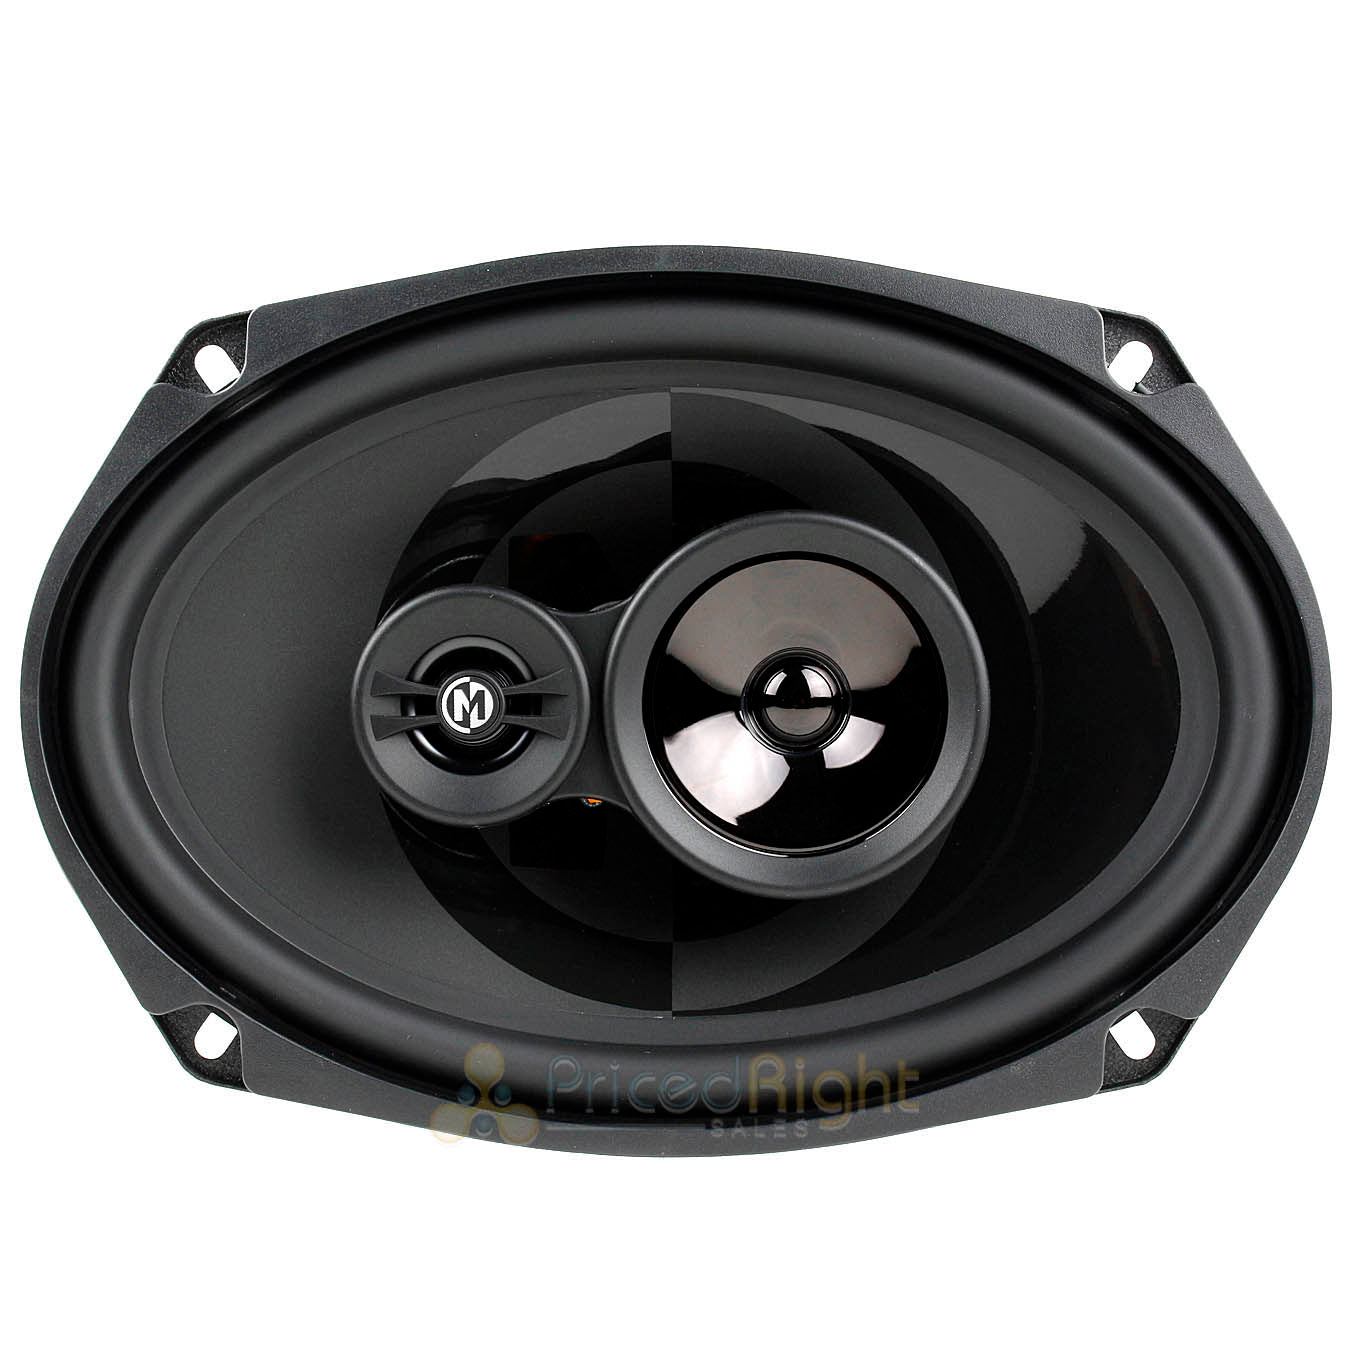 Memphis Audio 6x9" 3 Way Coaxial Speaker 120 Watts Max Power Reference PRX6903